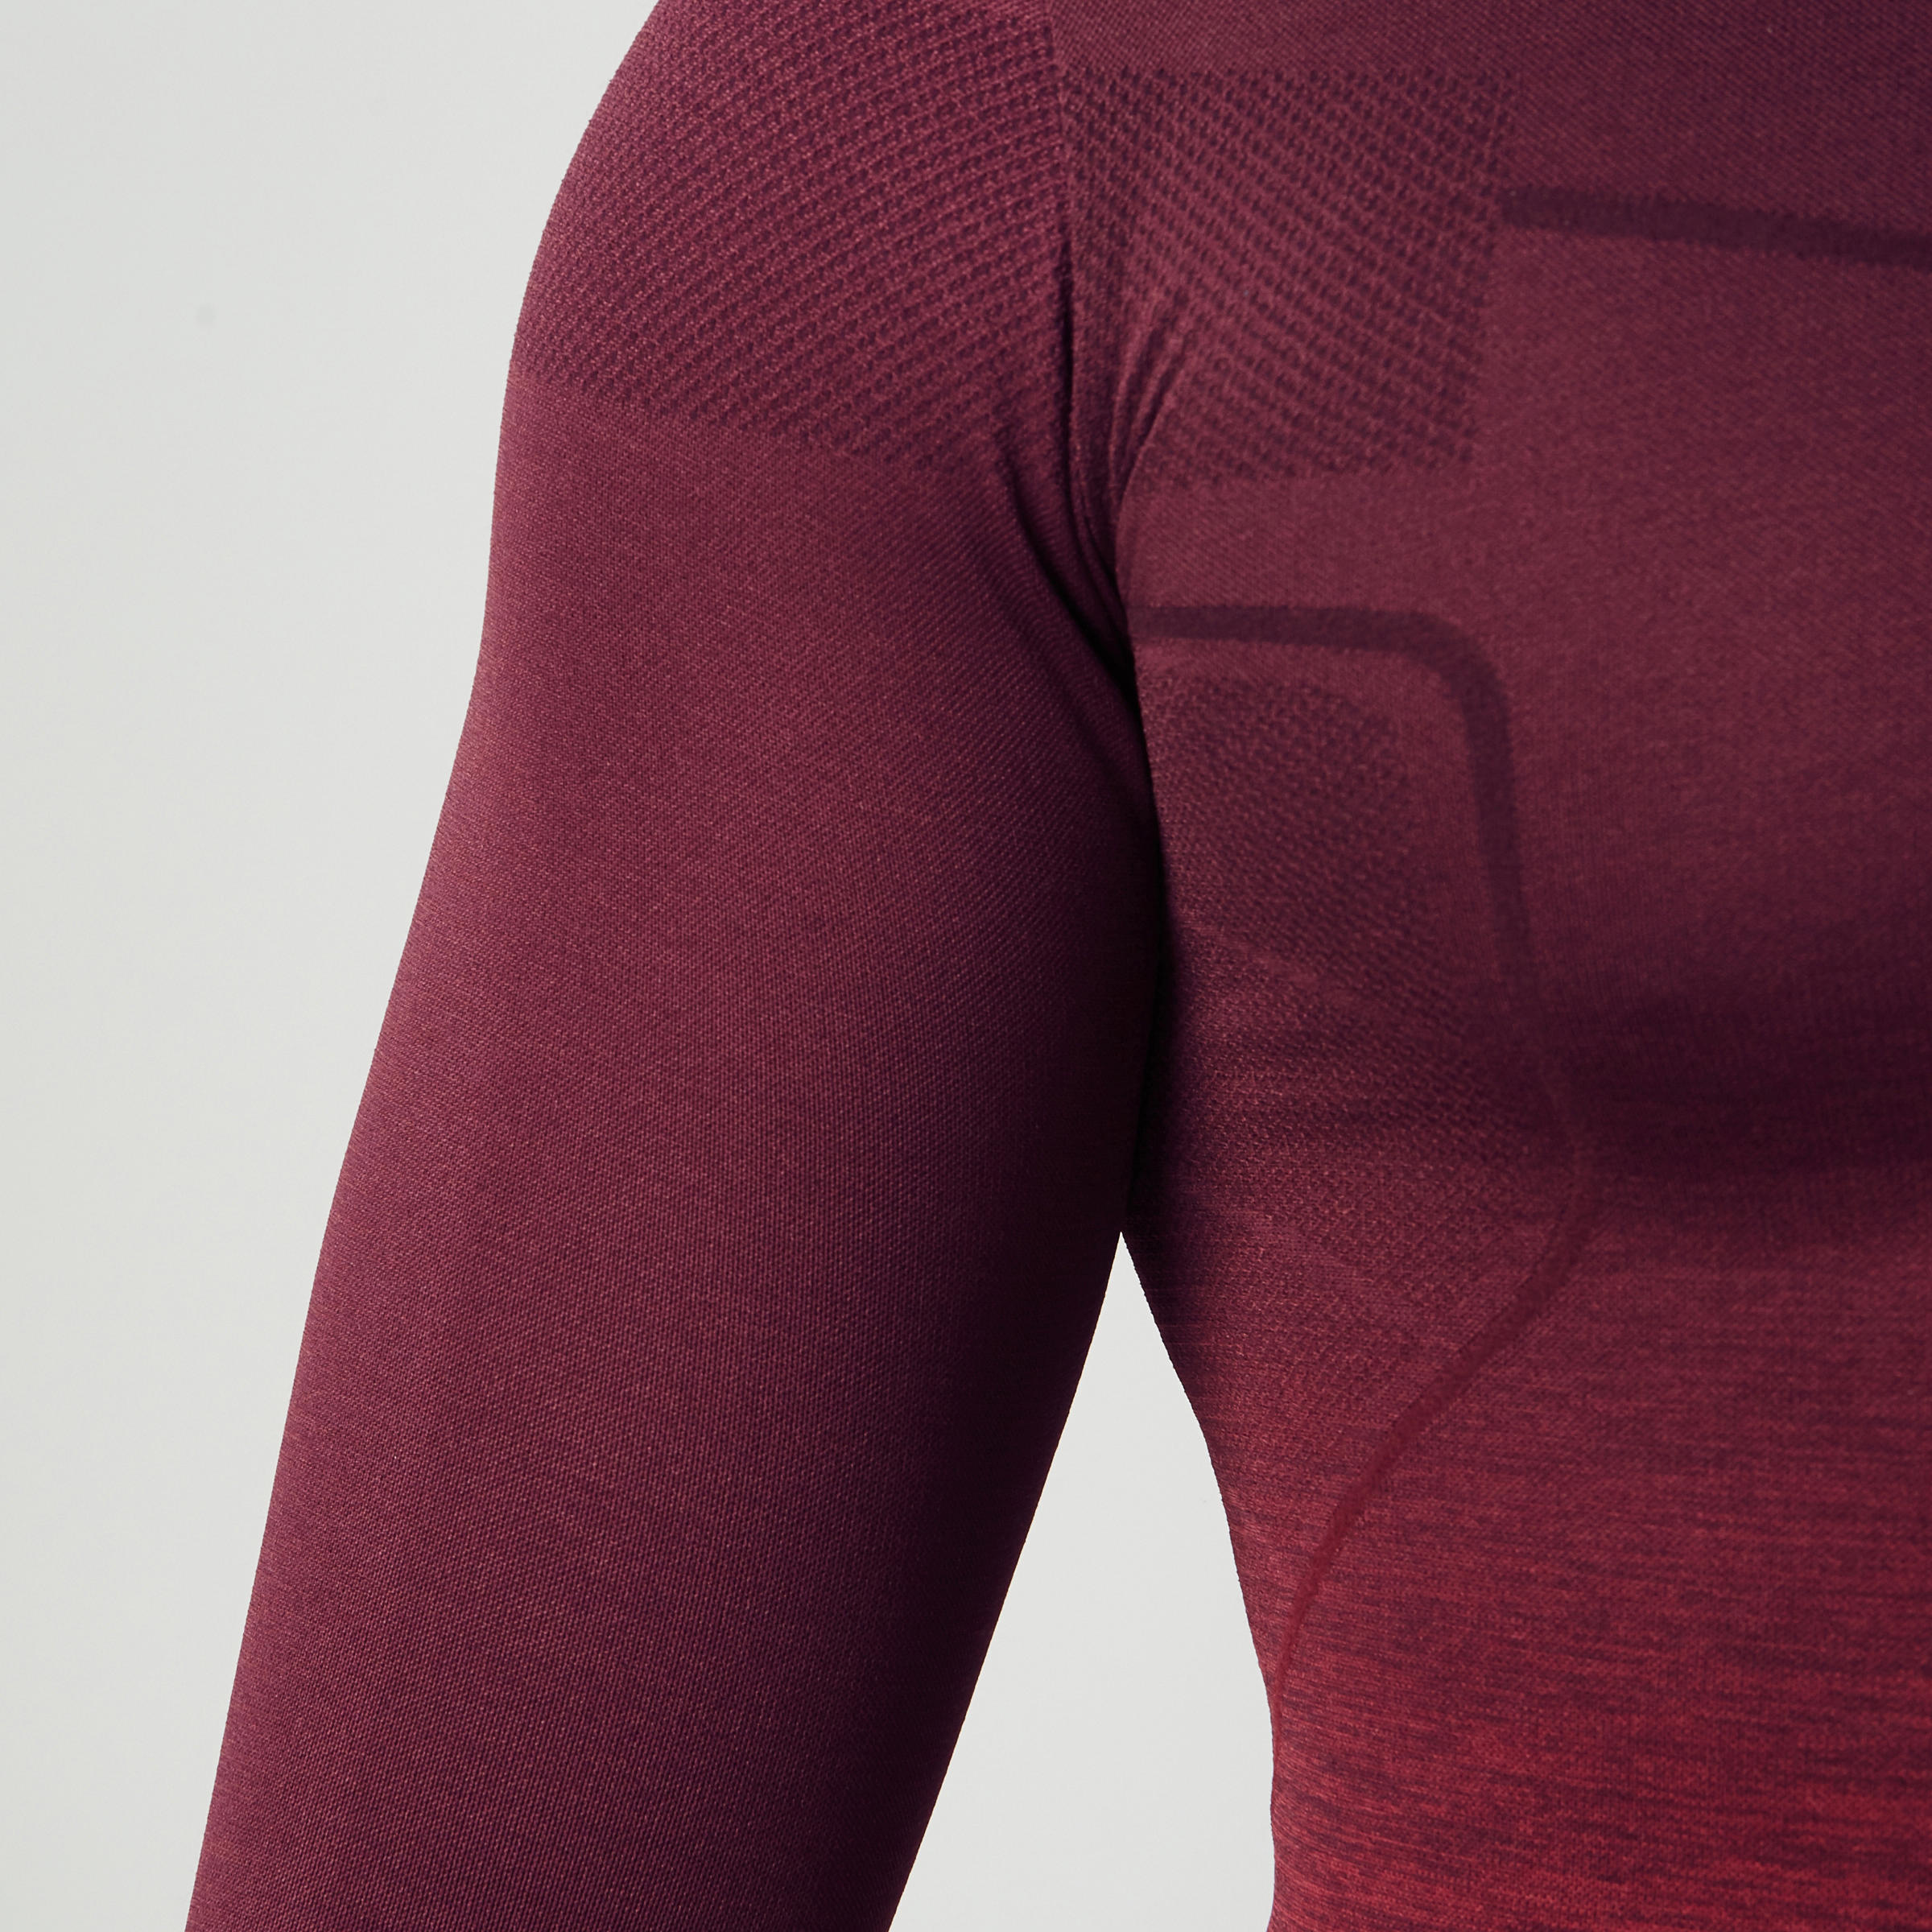 Keepdry 500 Adult Base Layer - Burgundy Ombre 7/11